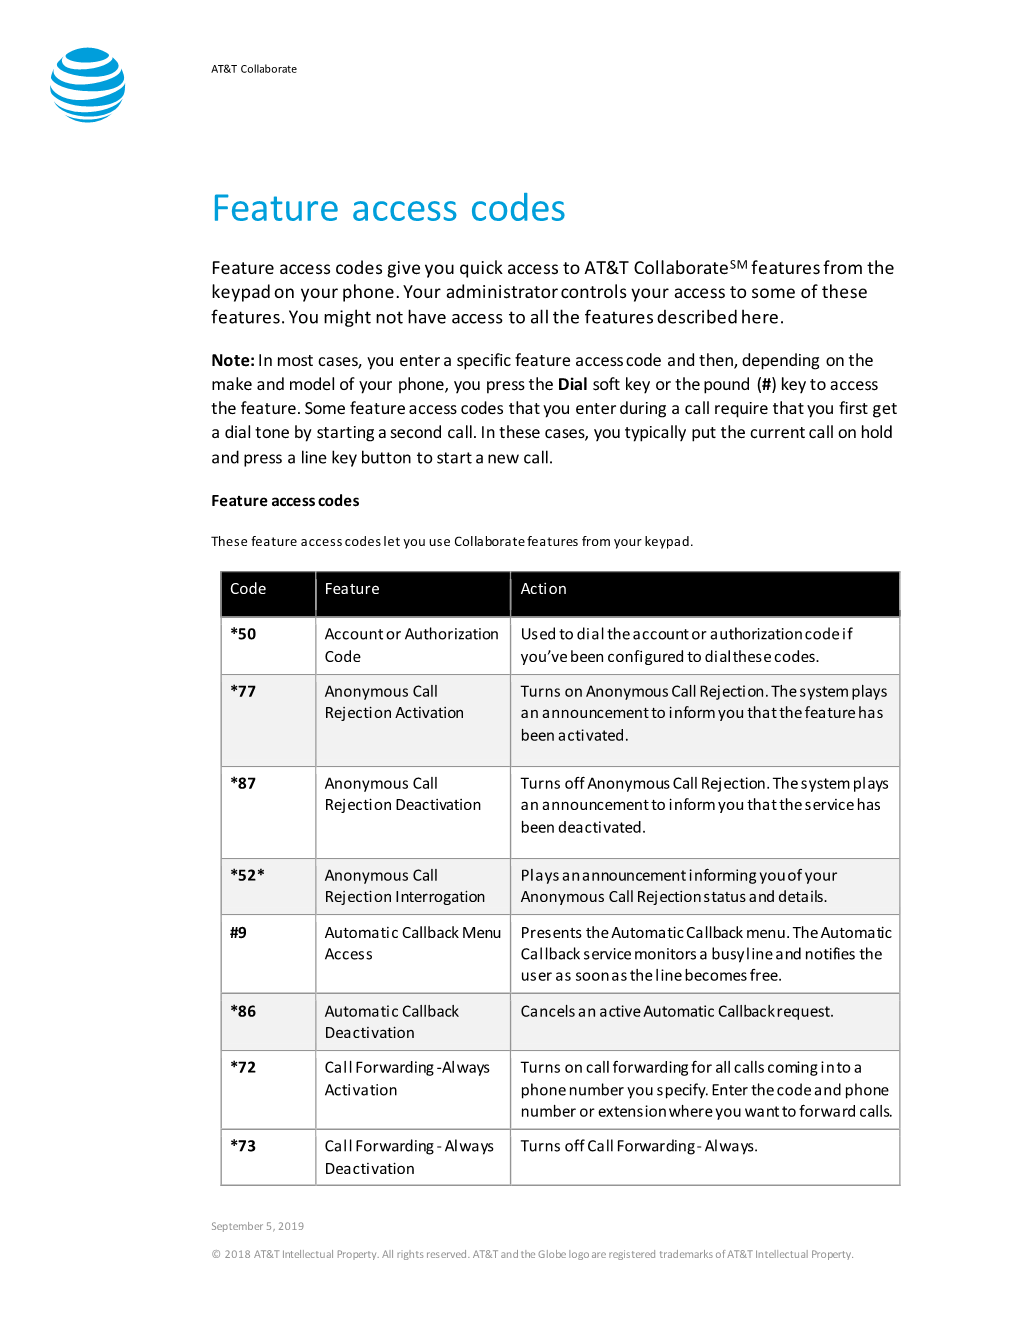 Feature Access Codes